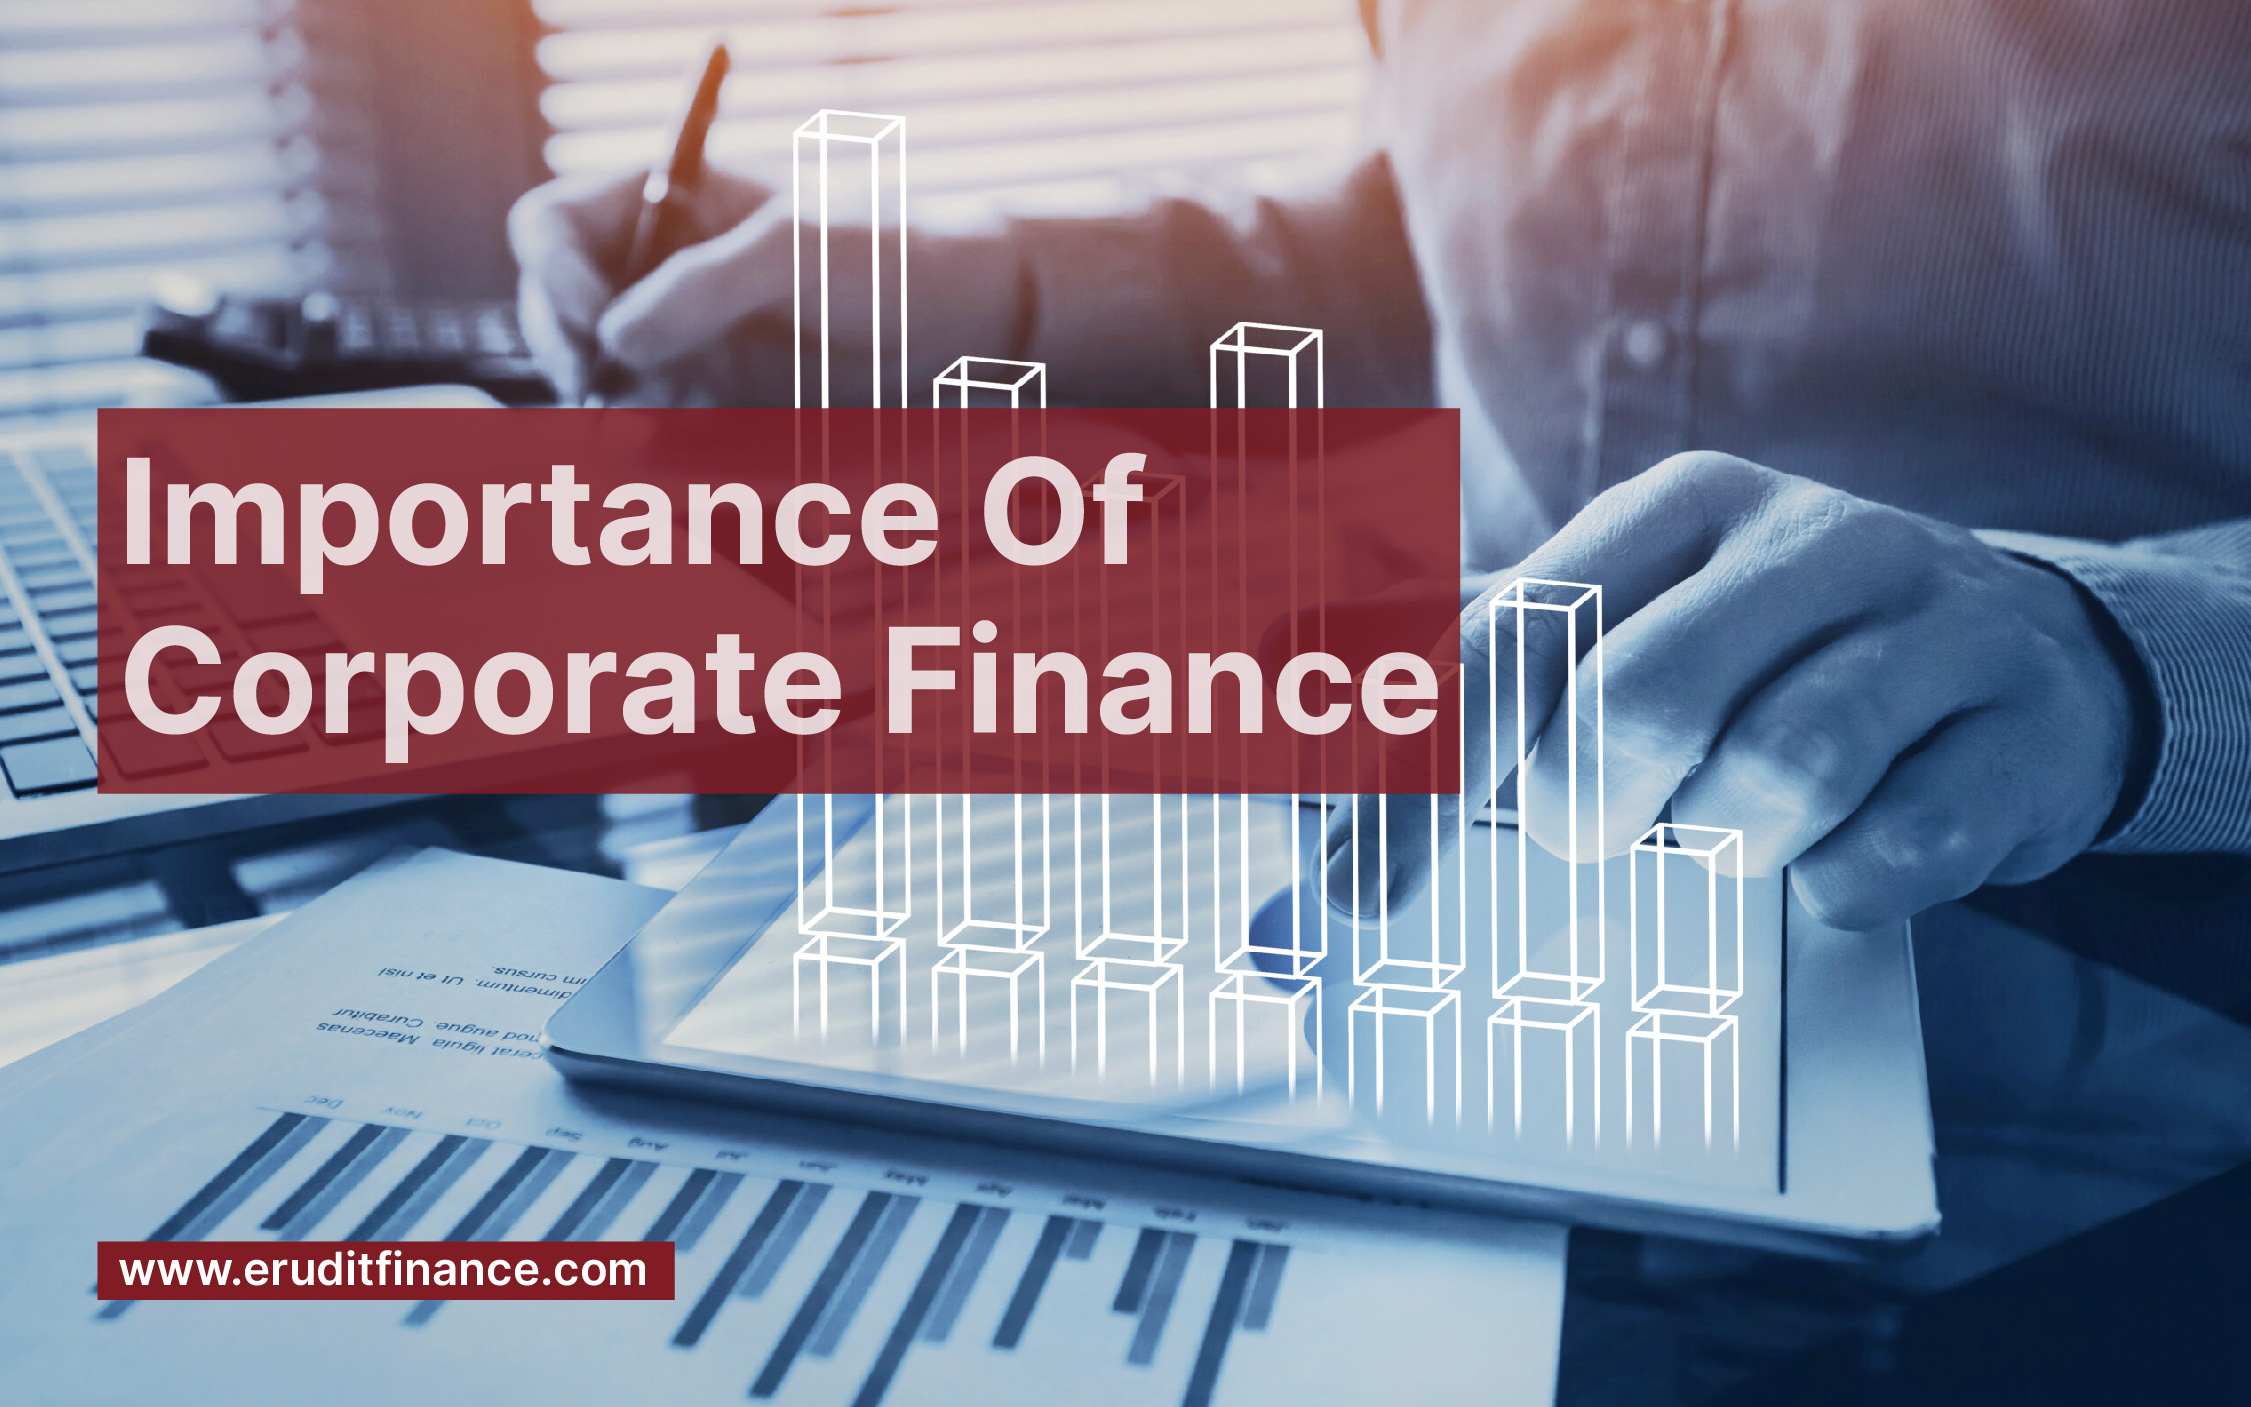 Importance of Corporate Finance